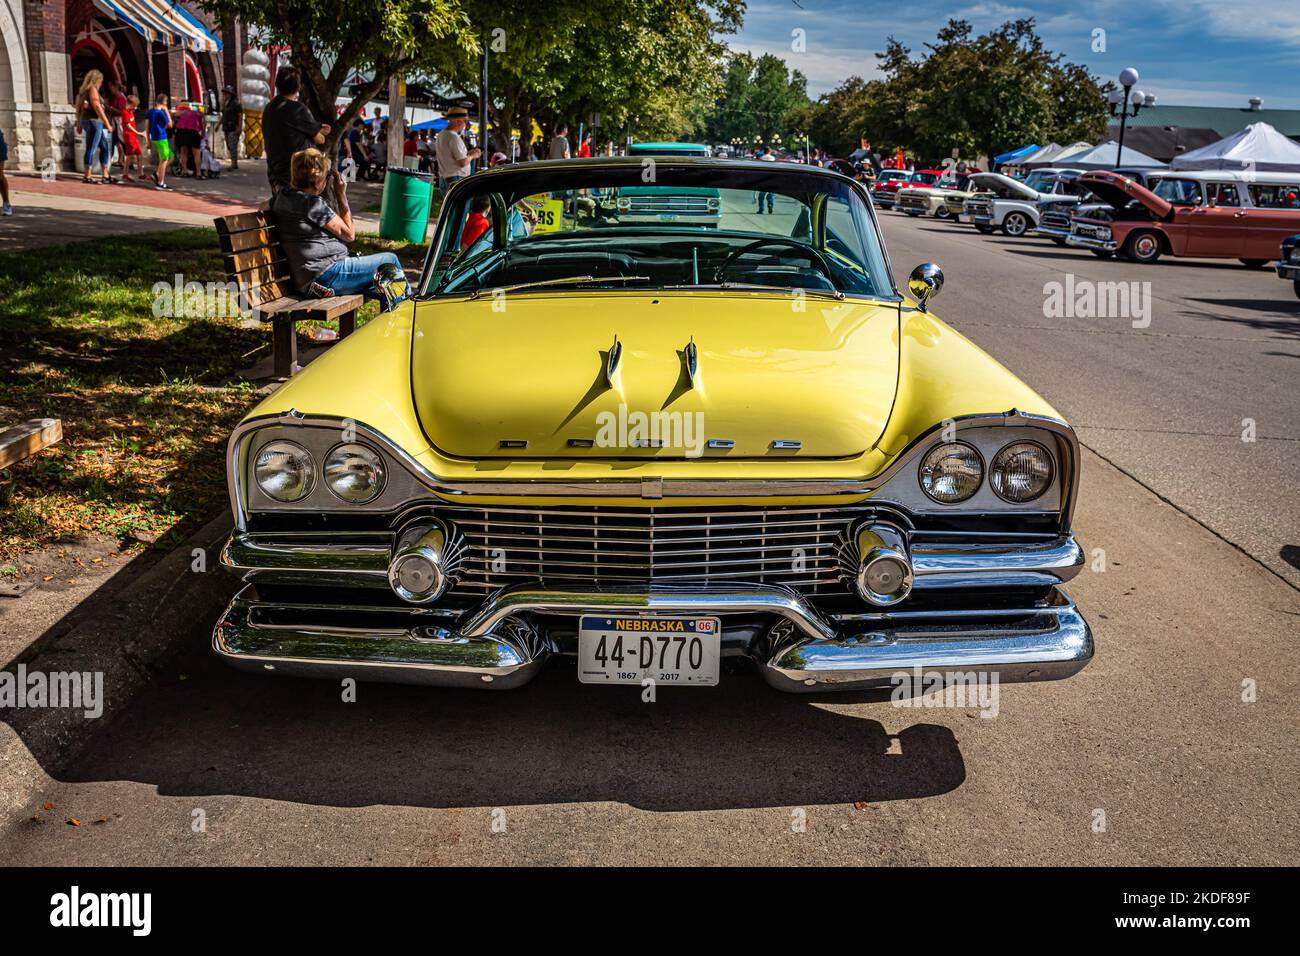 Des Moines, IA - July 01, 2022: High perspective front view of a 1958 Dodge Royal Lancer 2 Door Hardtop at a local car show. Stock Photo